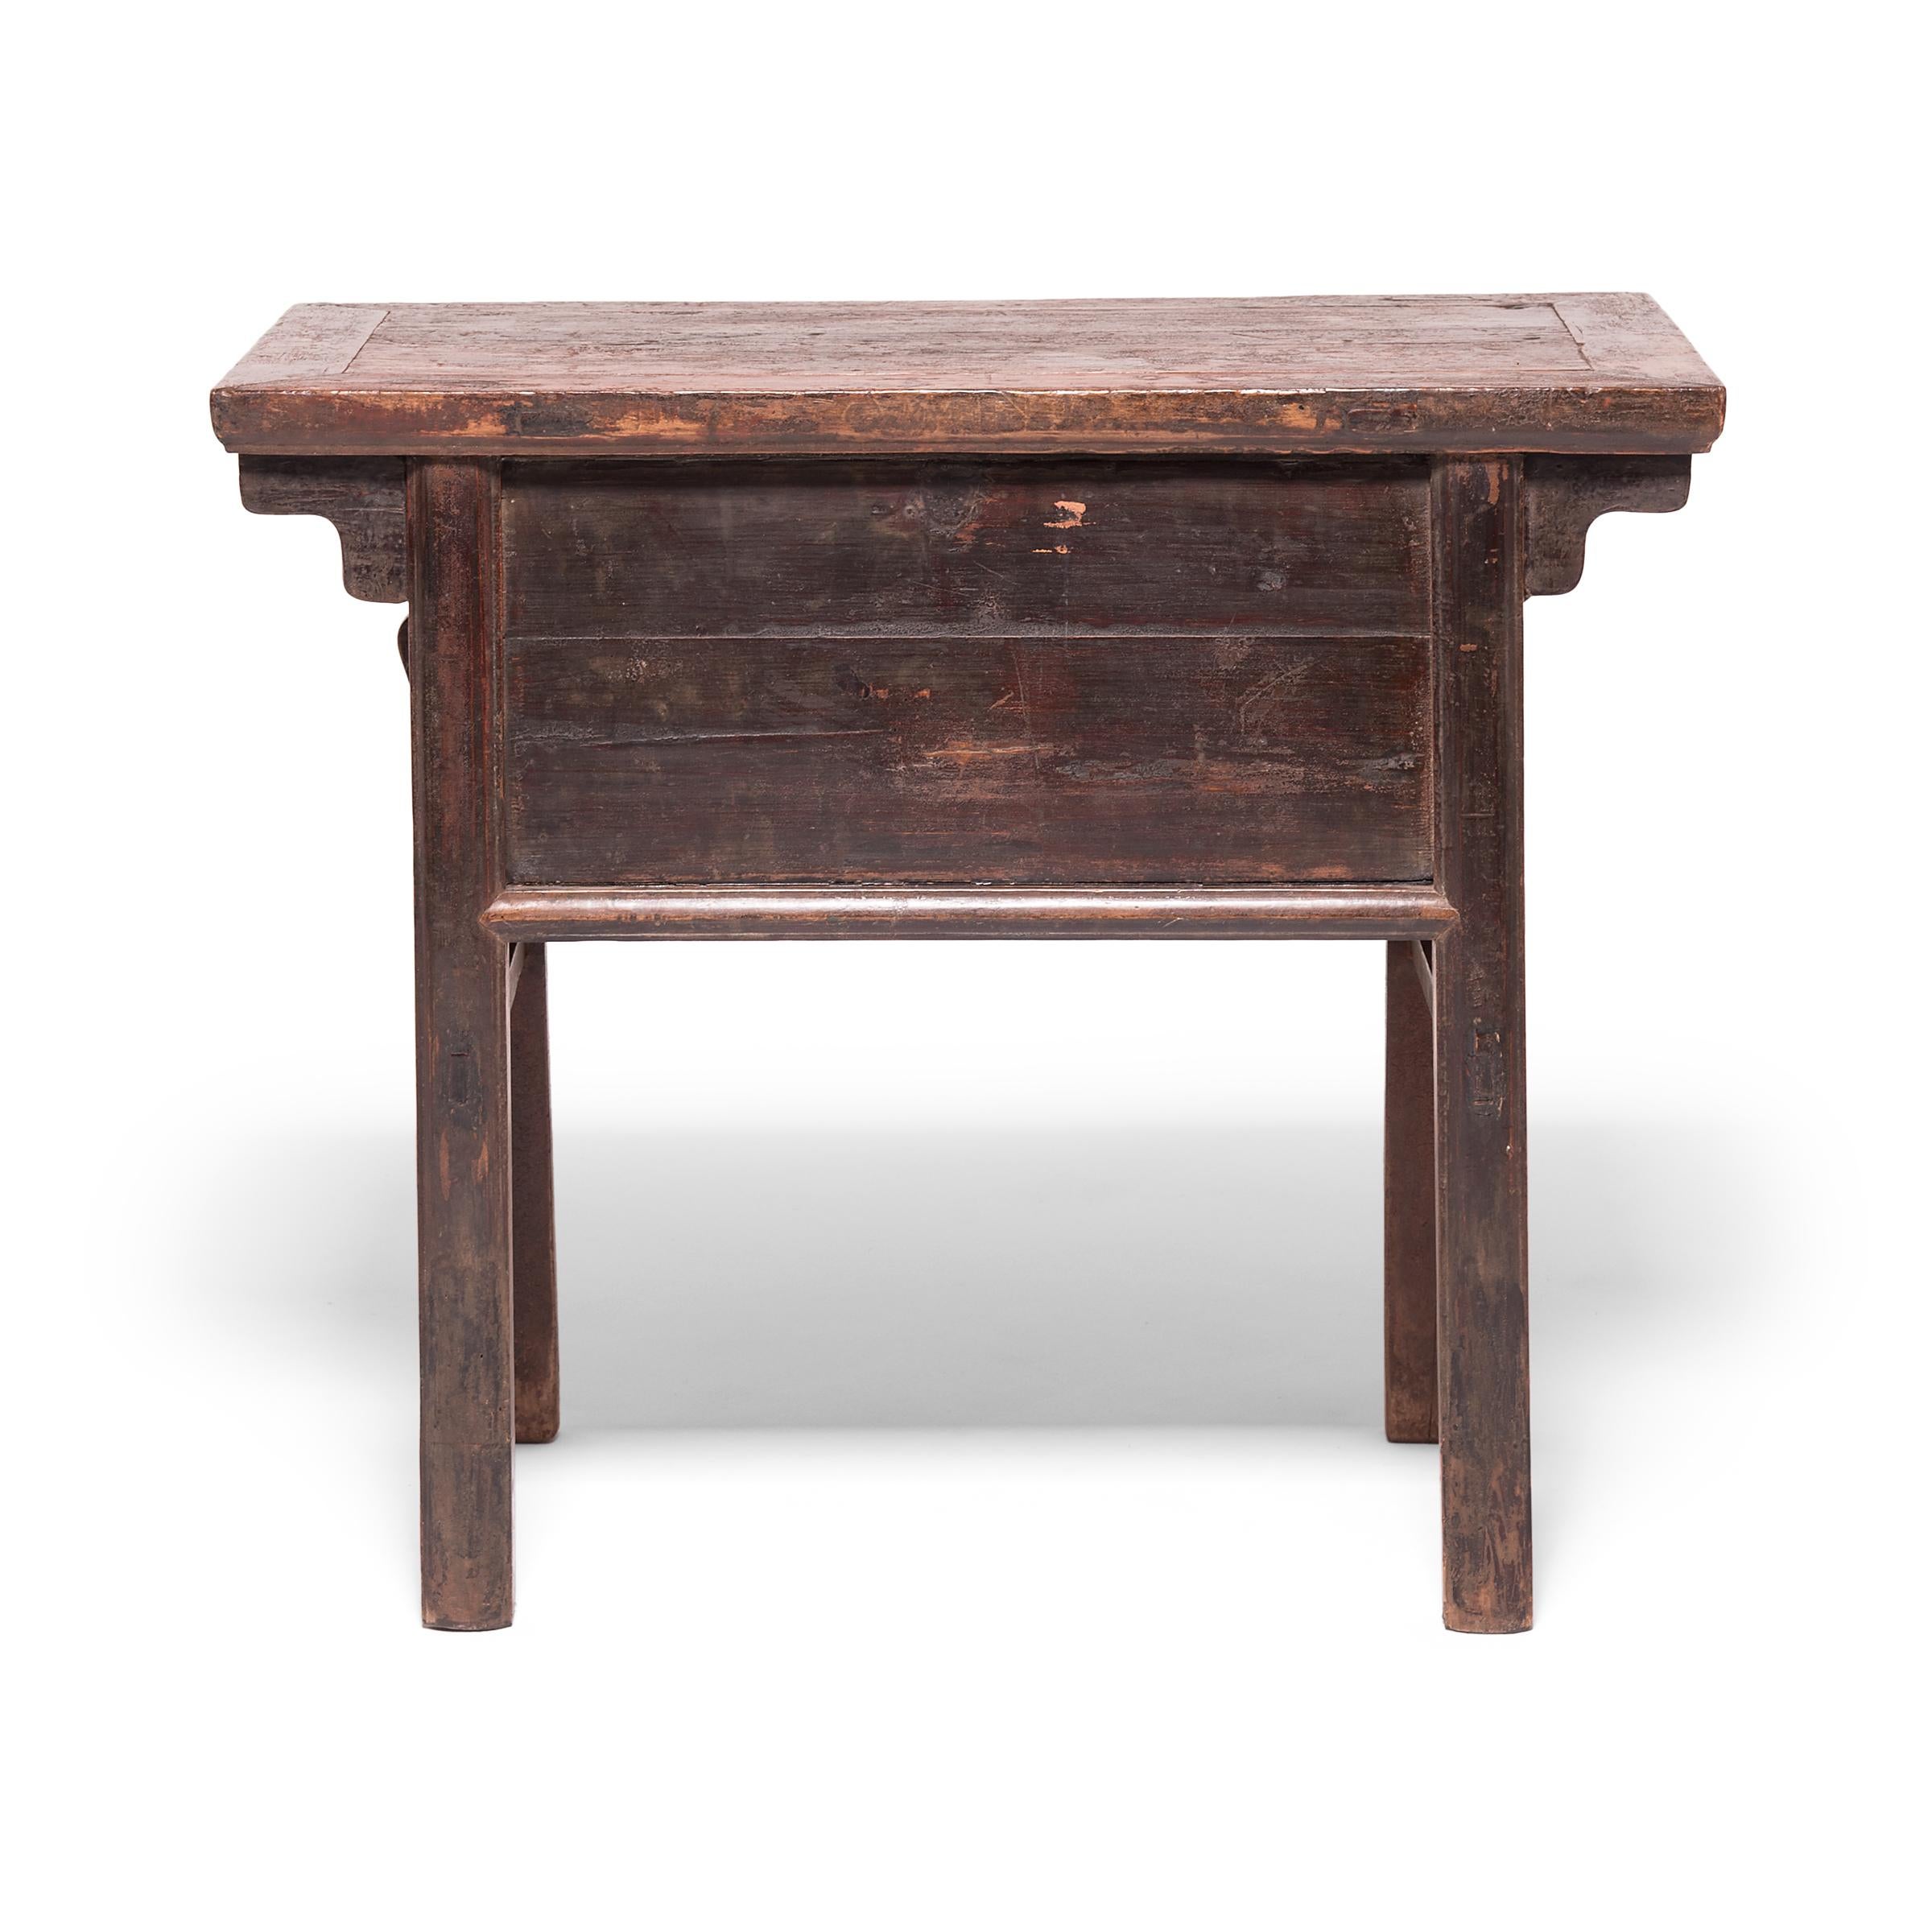 Qing 19th Century Chinese Rustic Lacquer Side Table with Drawer